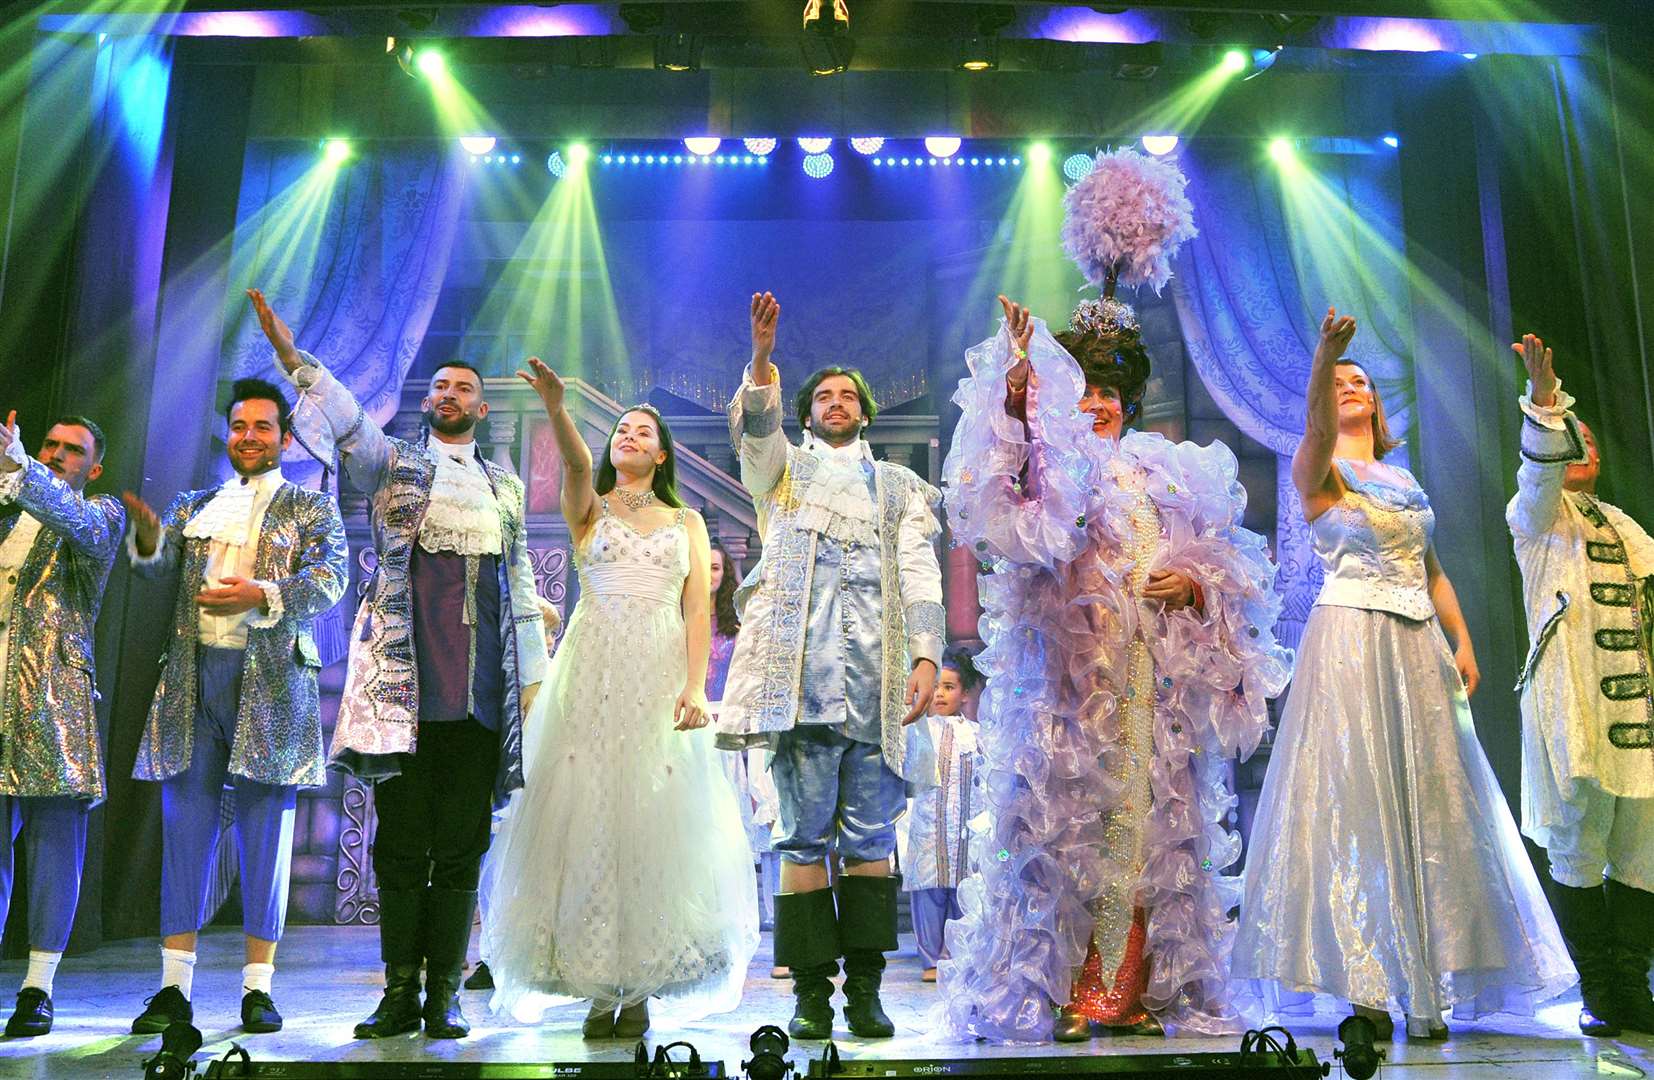 Beauty and the Beast performed at the Hazlitt Theatre